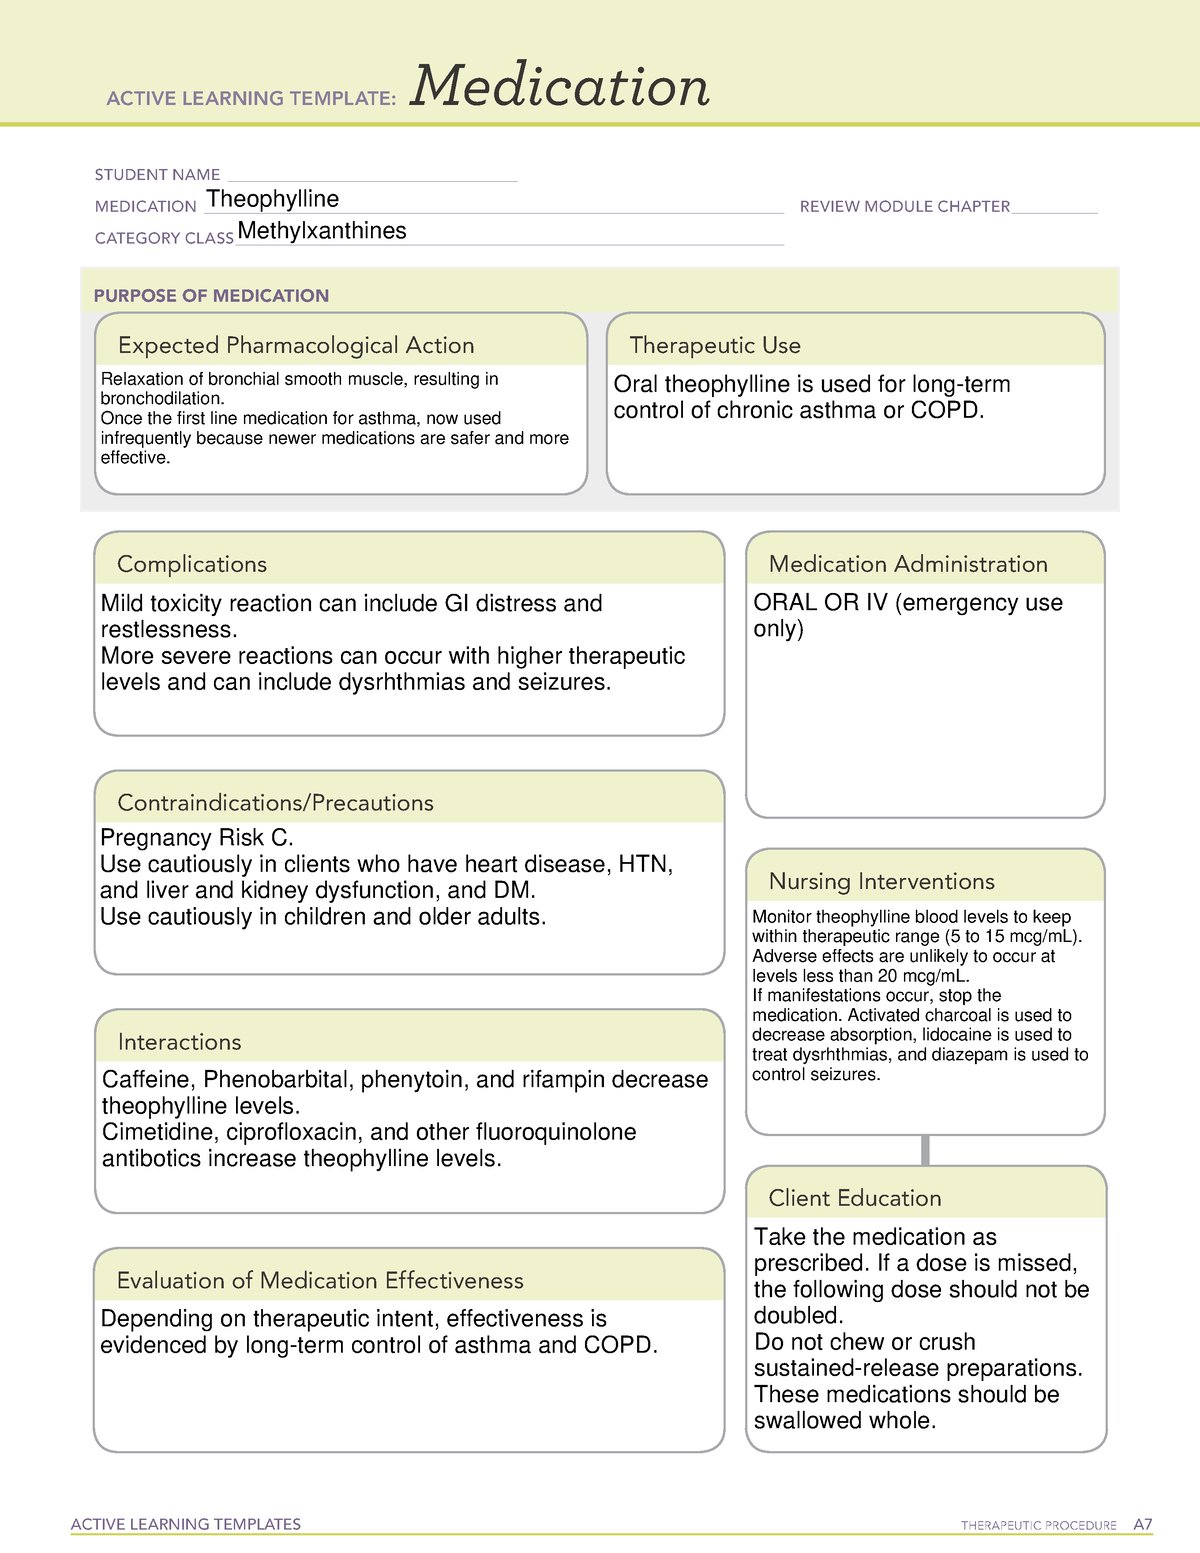 Theophylline Medication Template